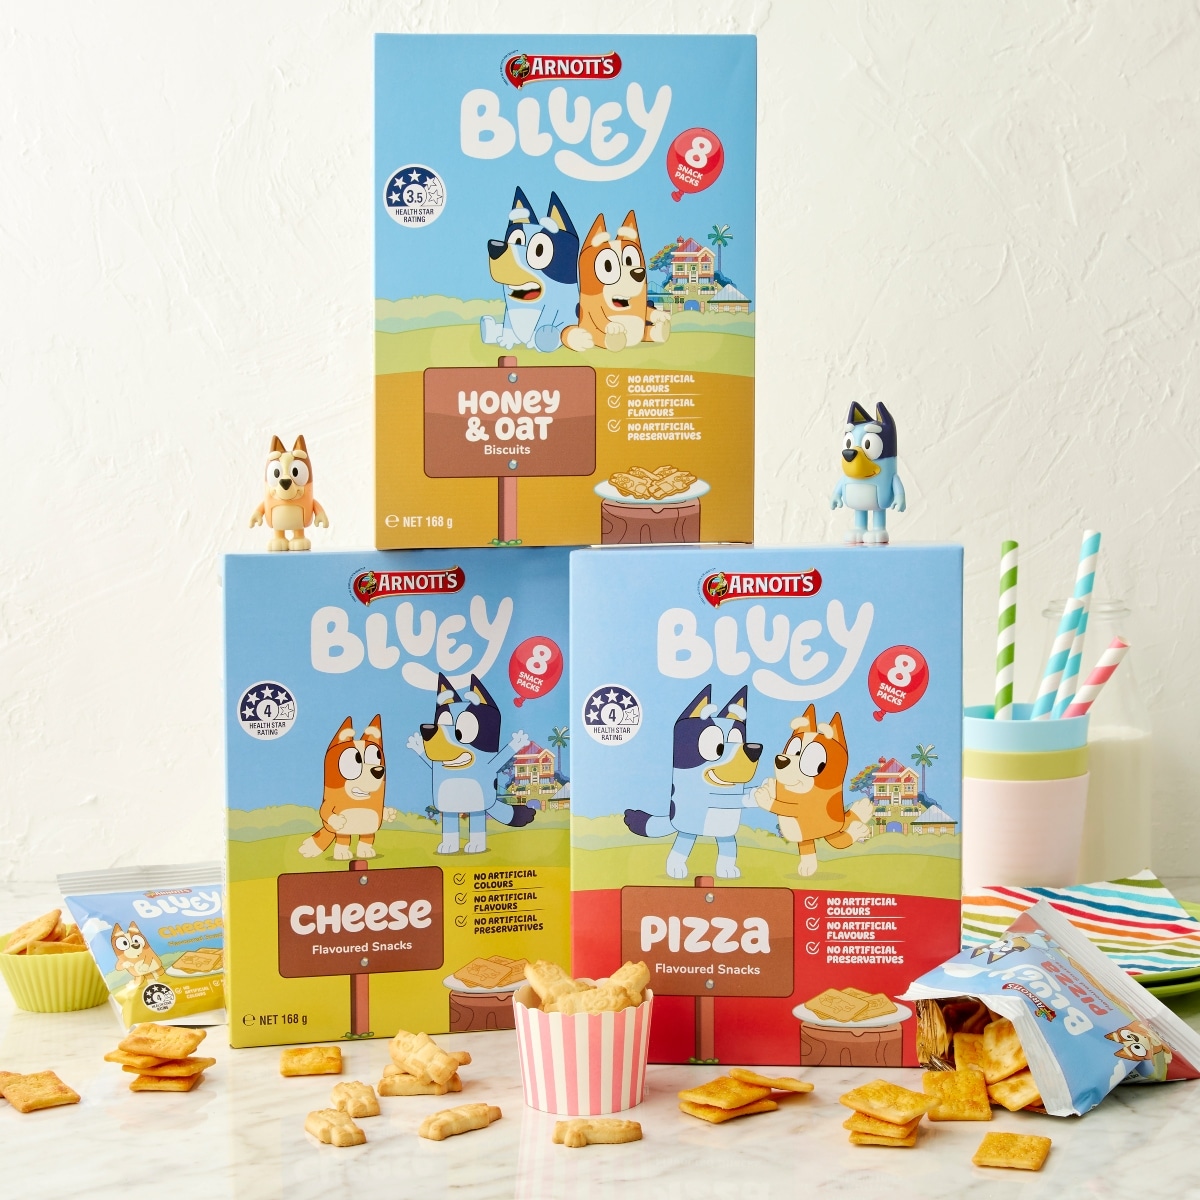 Arnott's has released a Bluey biscuit range